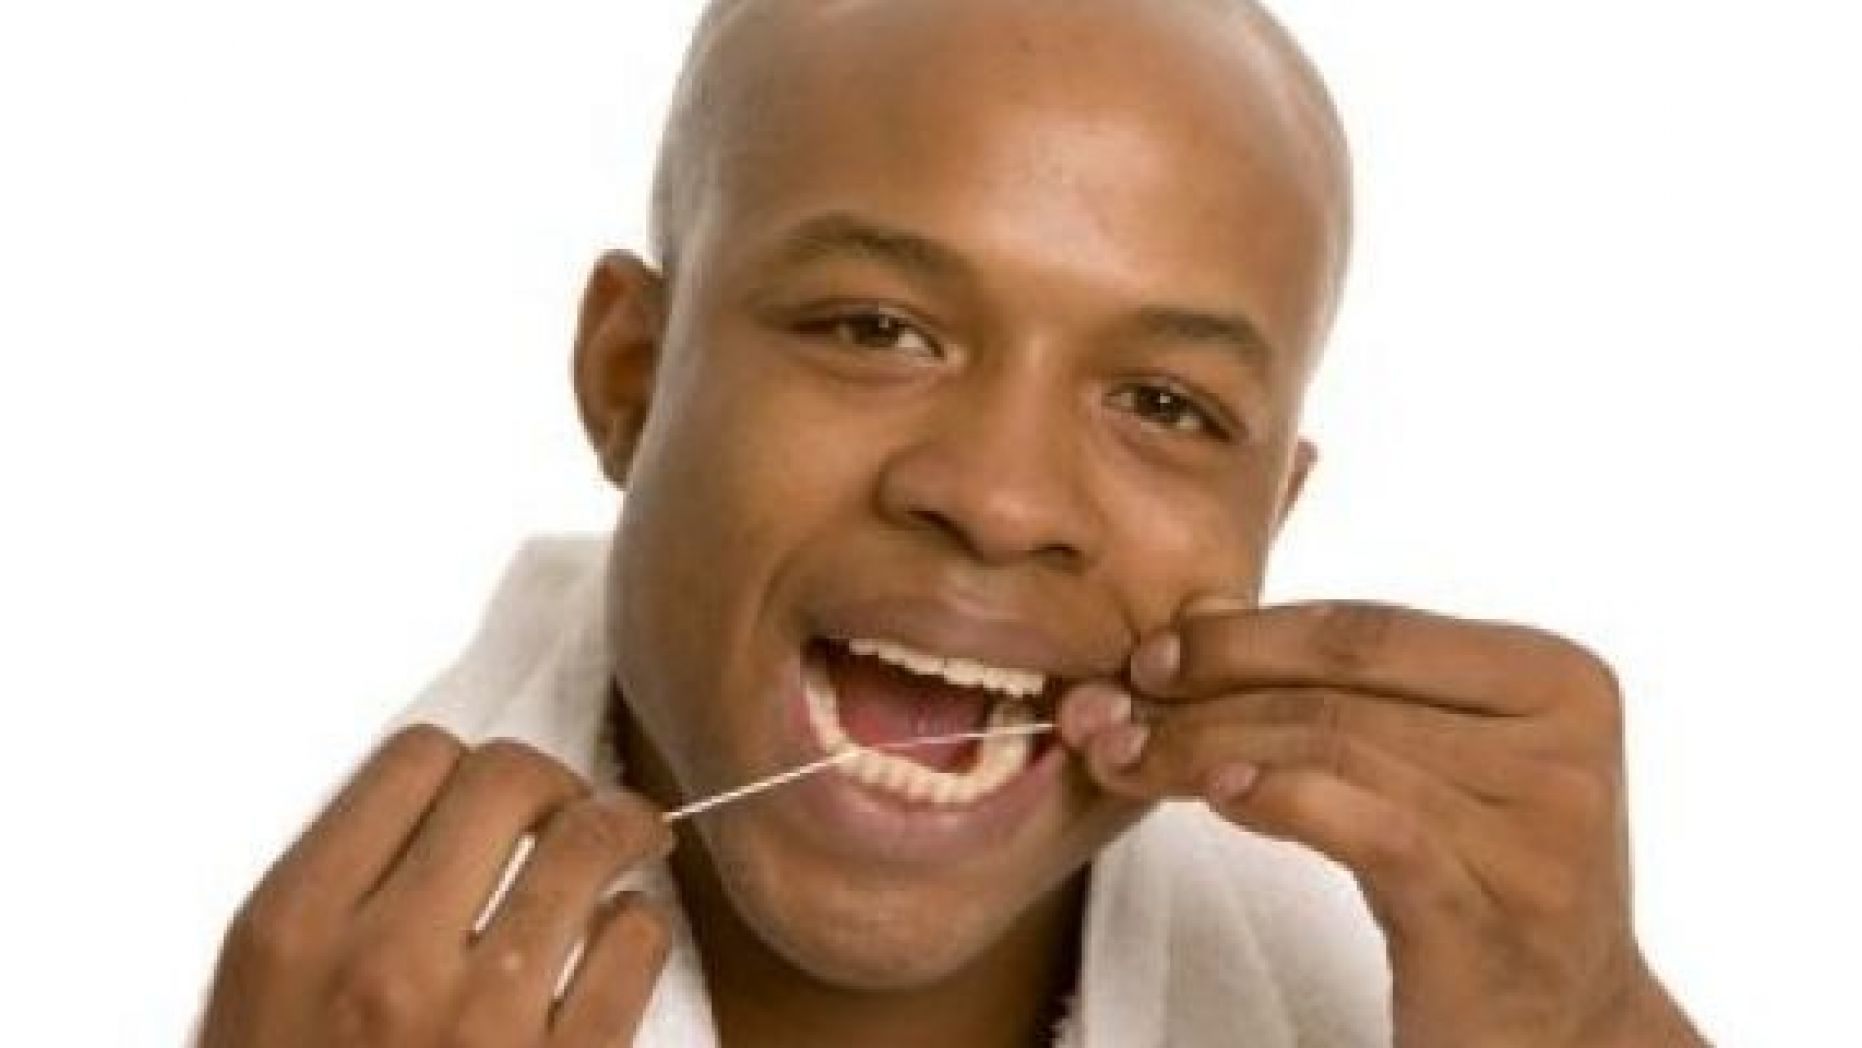 How to Prevent Bad Breath